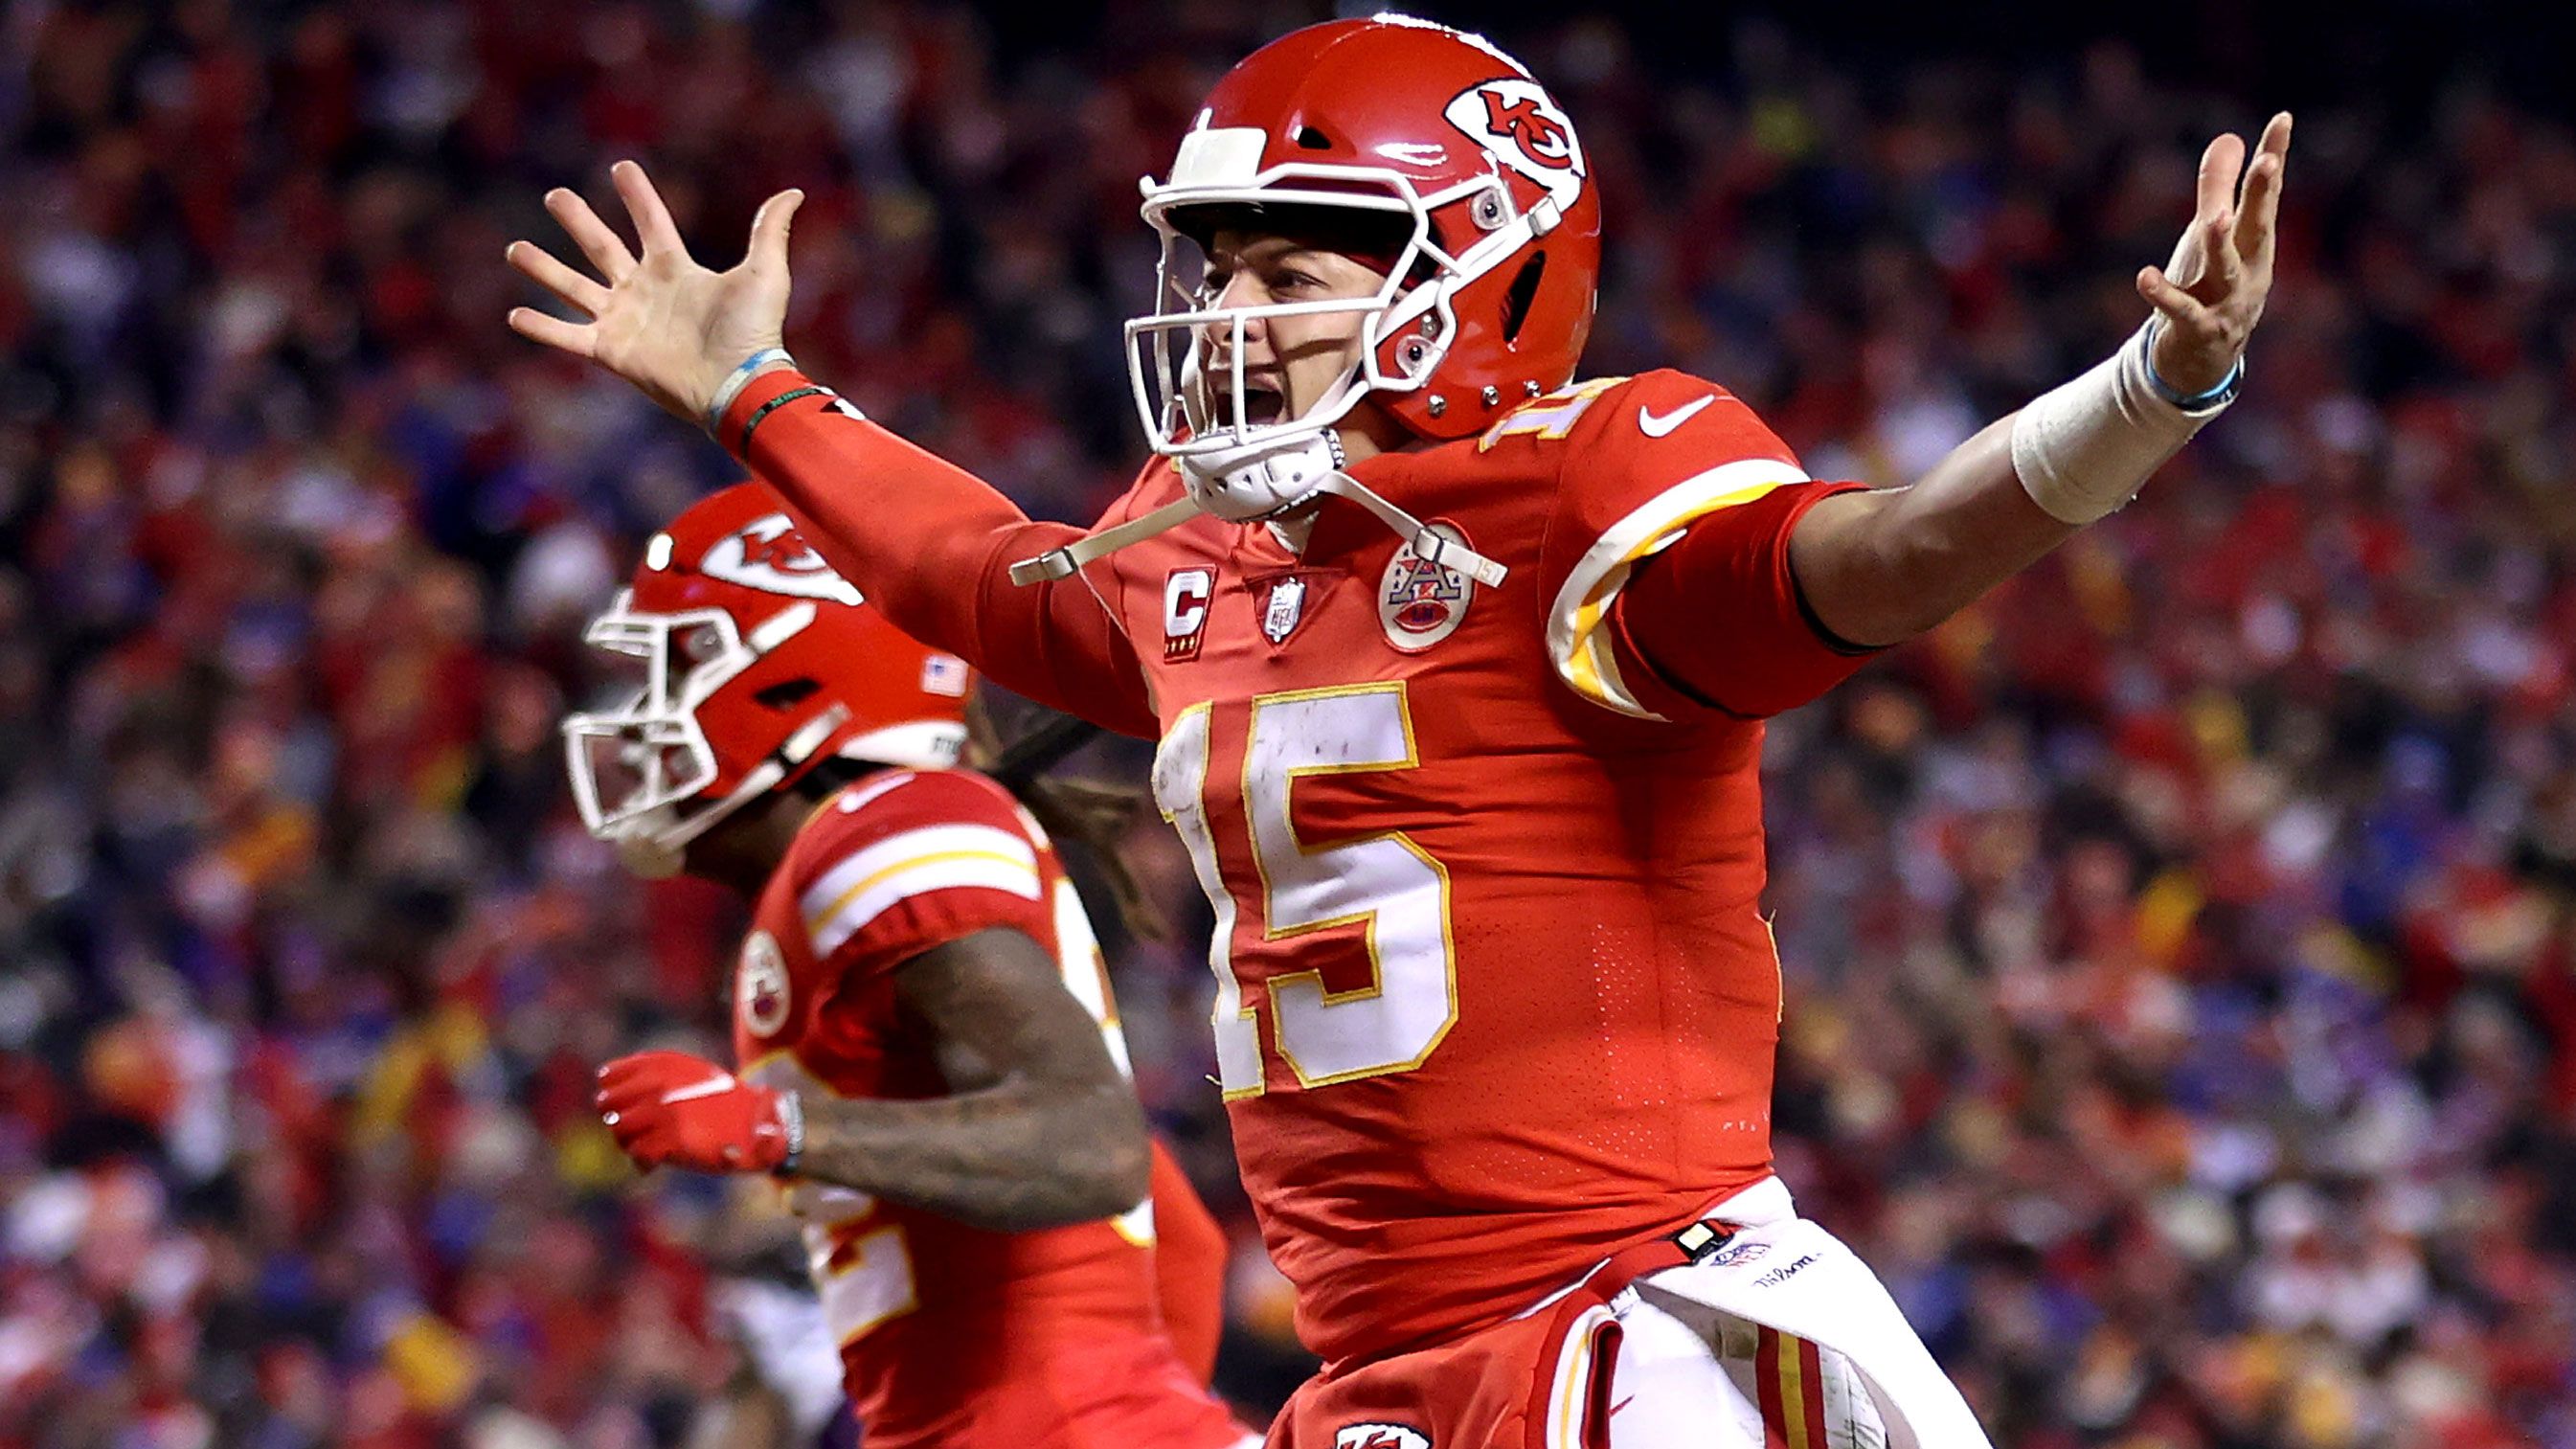 Patrick Mahomes #15 of the Kansas City Chiefs celebrates a touchdown scored by Tyreek Hill #10 against the Buffalo Bills.